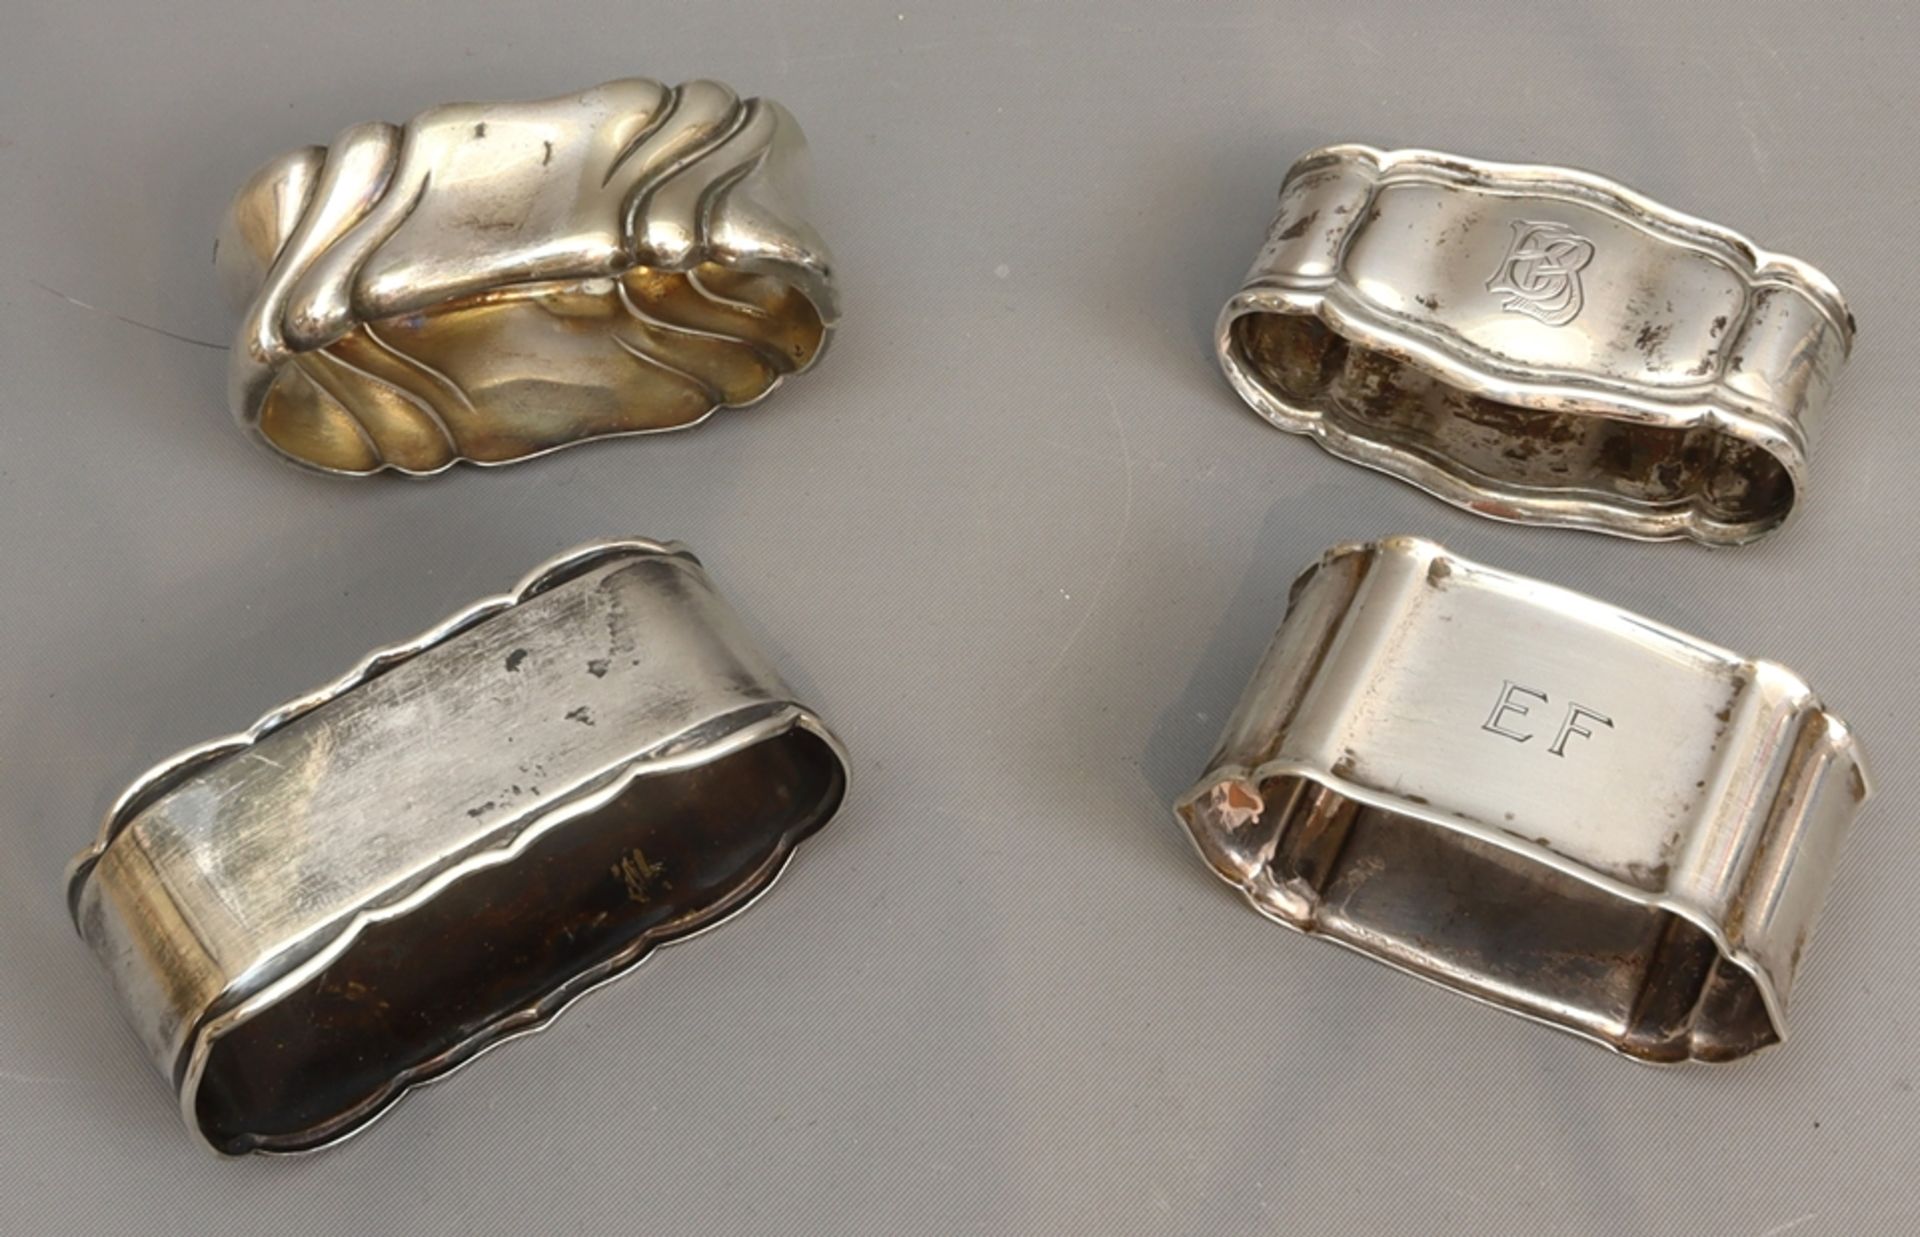 Lot of silver napkin rings of different types, historicism to the 1930s, German - Image 2 of 2